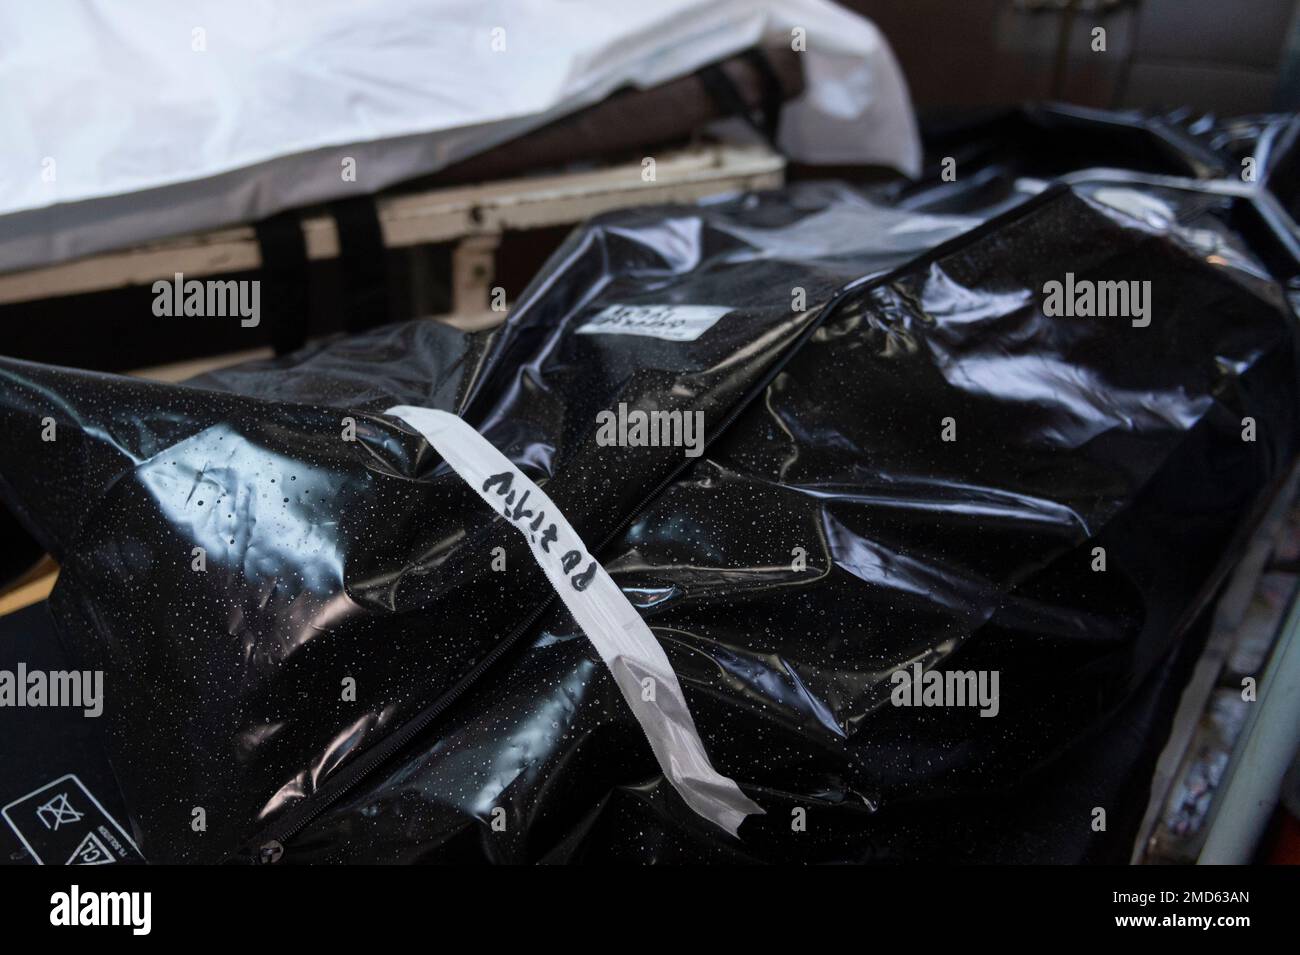 A body bag labeled "Positive" at the University Hospital morgue in  Bucharest, Romania, Friday, Oct. 29, 2021. Over the past weeks Romania  reported record numbers of daily new infections and deaths. (AP